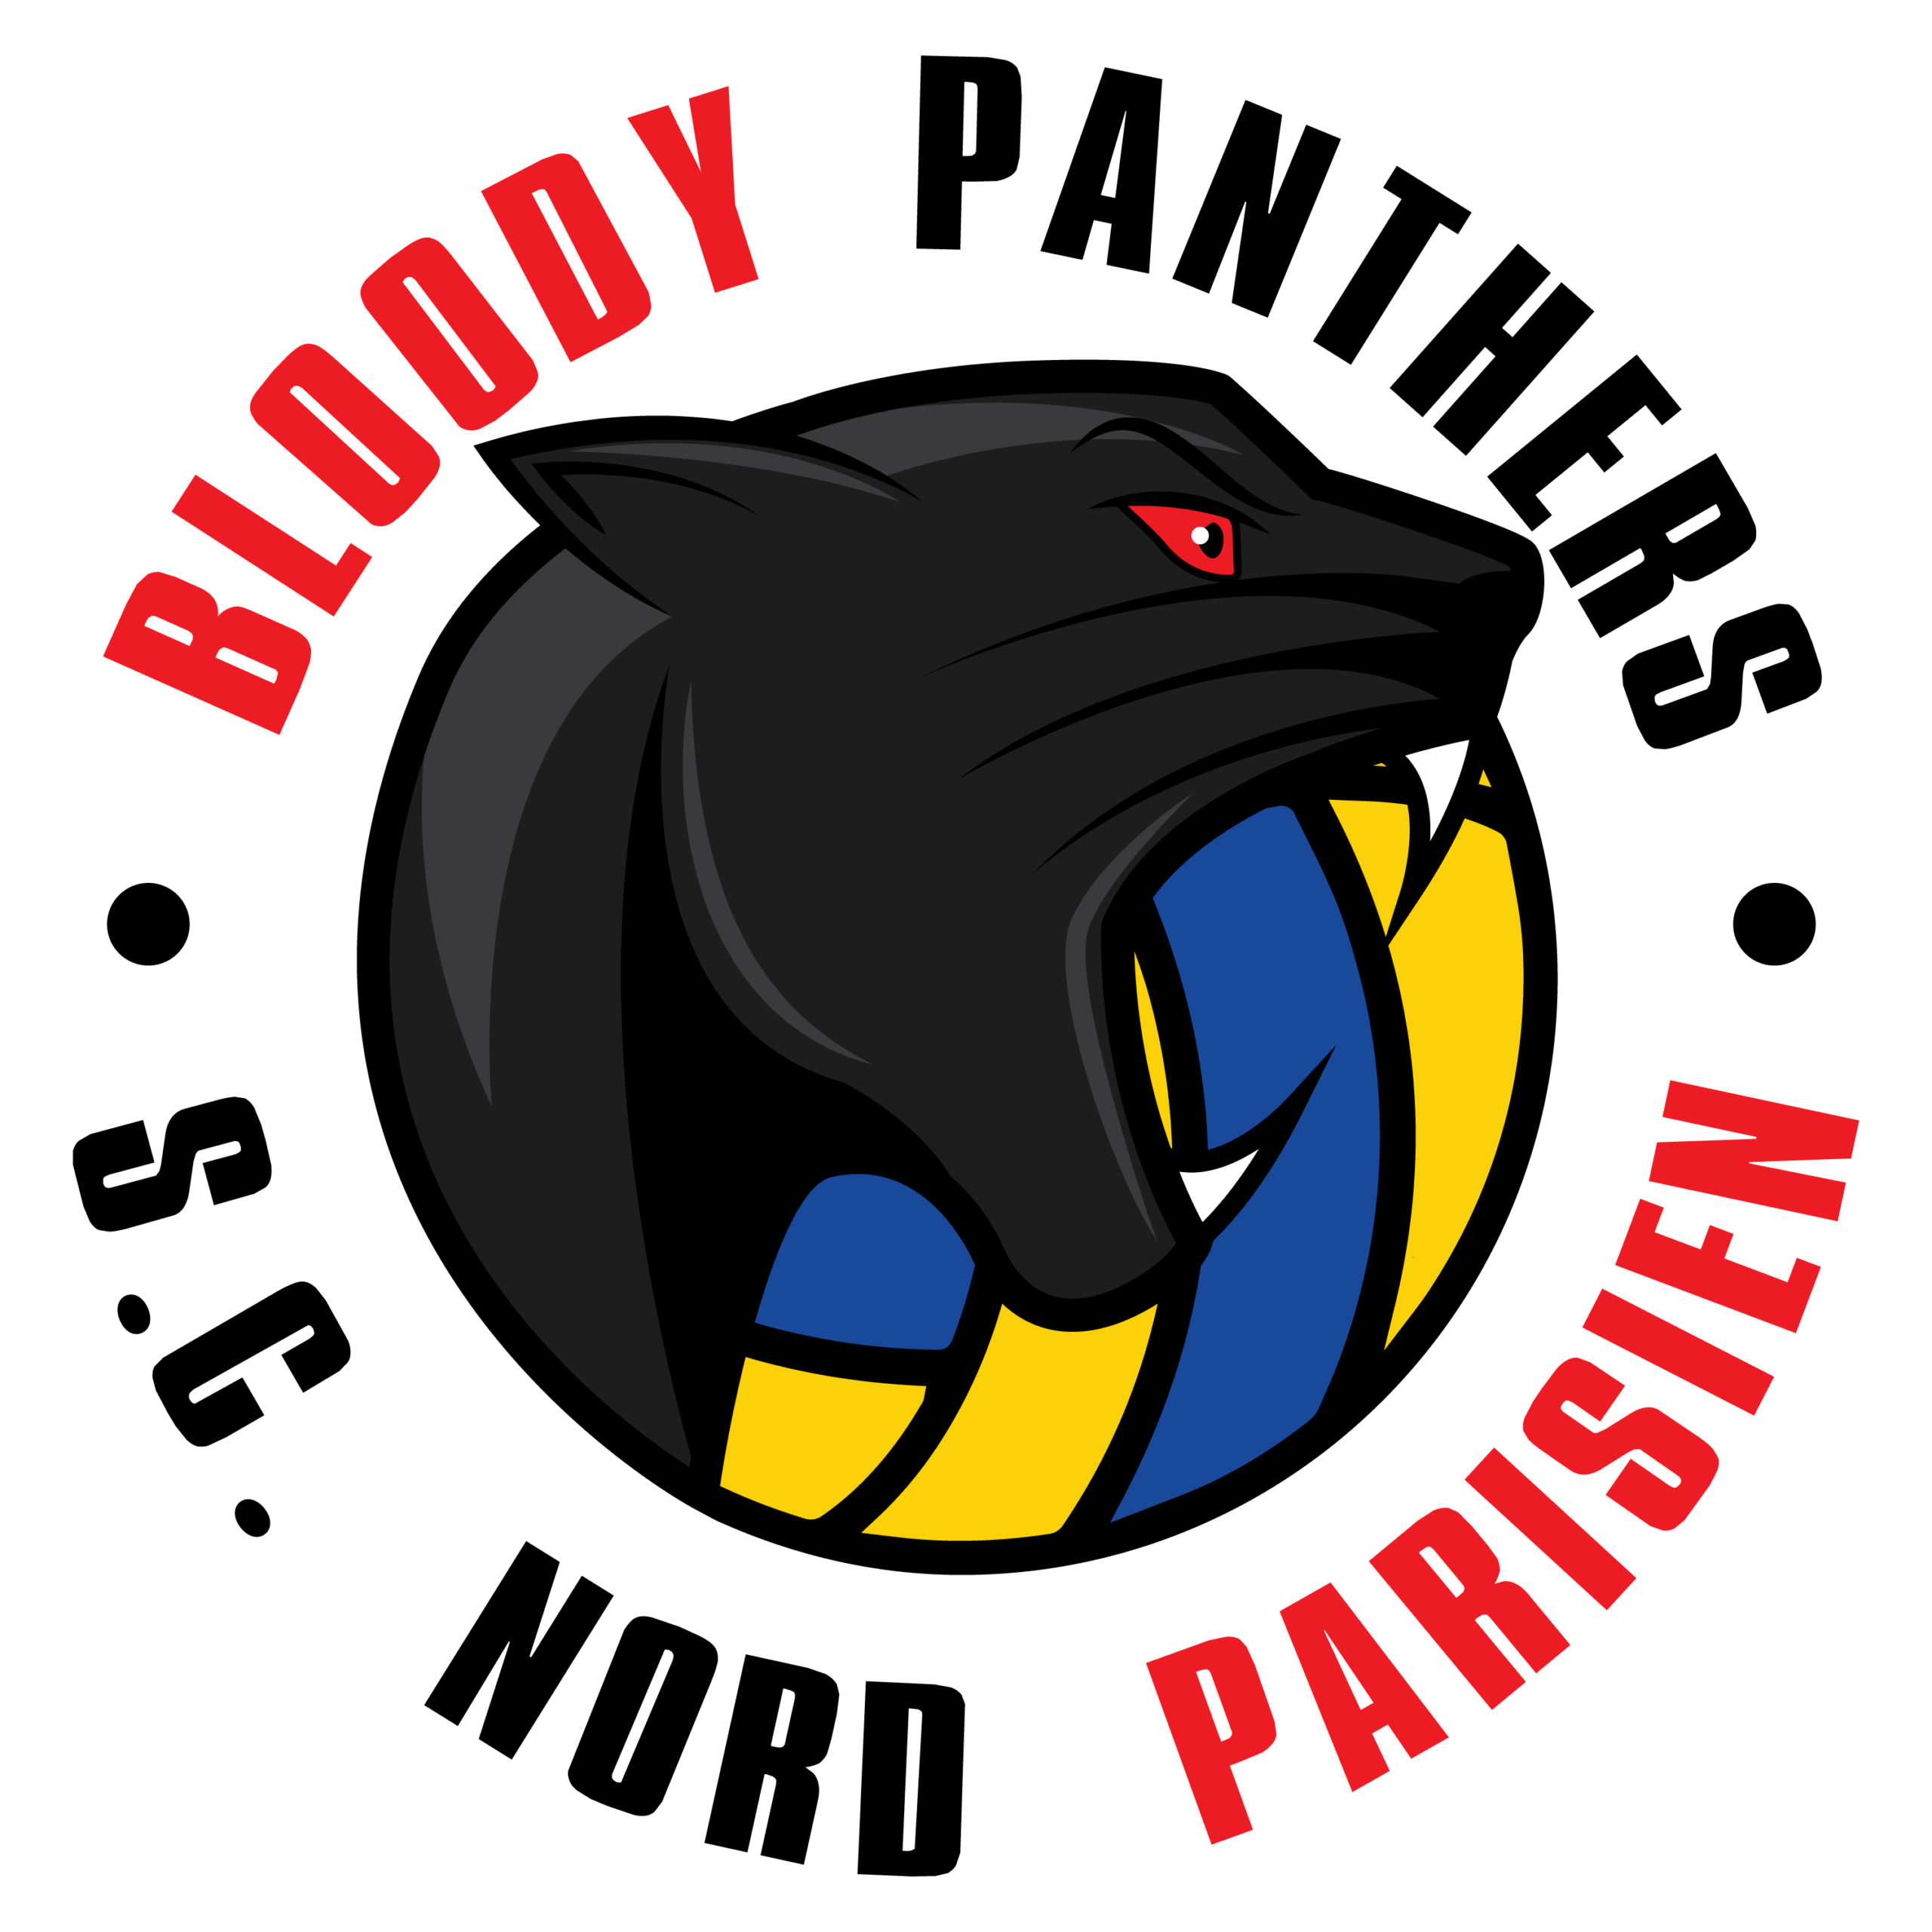 BLOODY PANTHERS